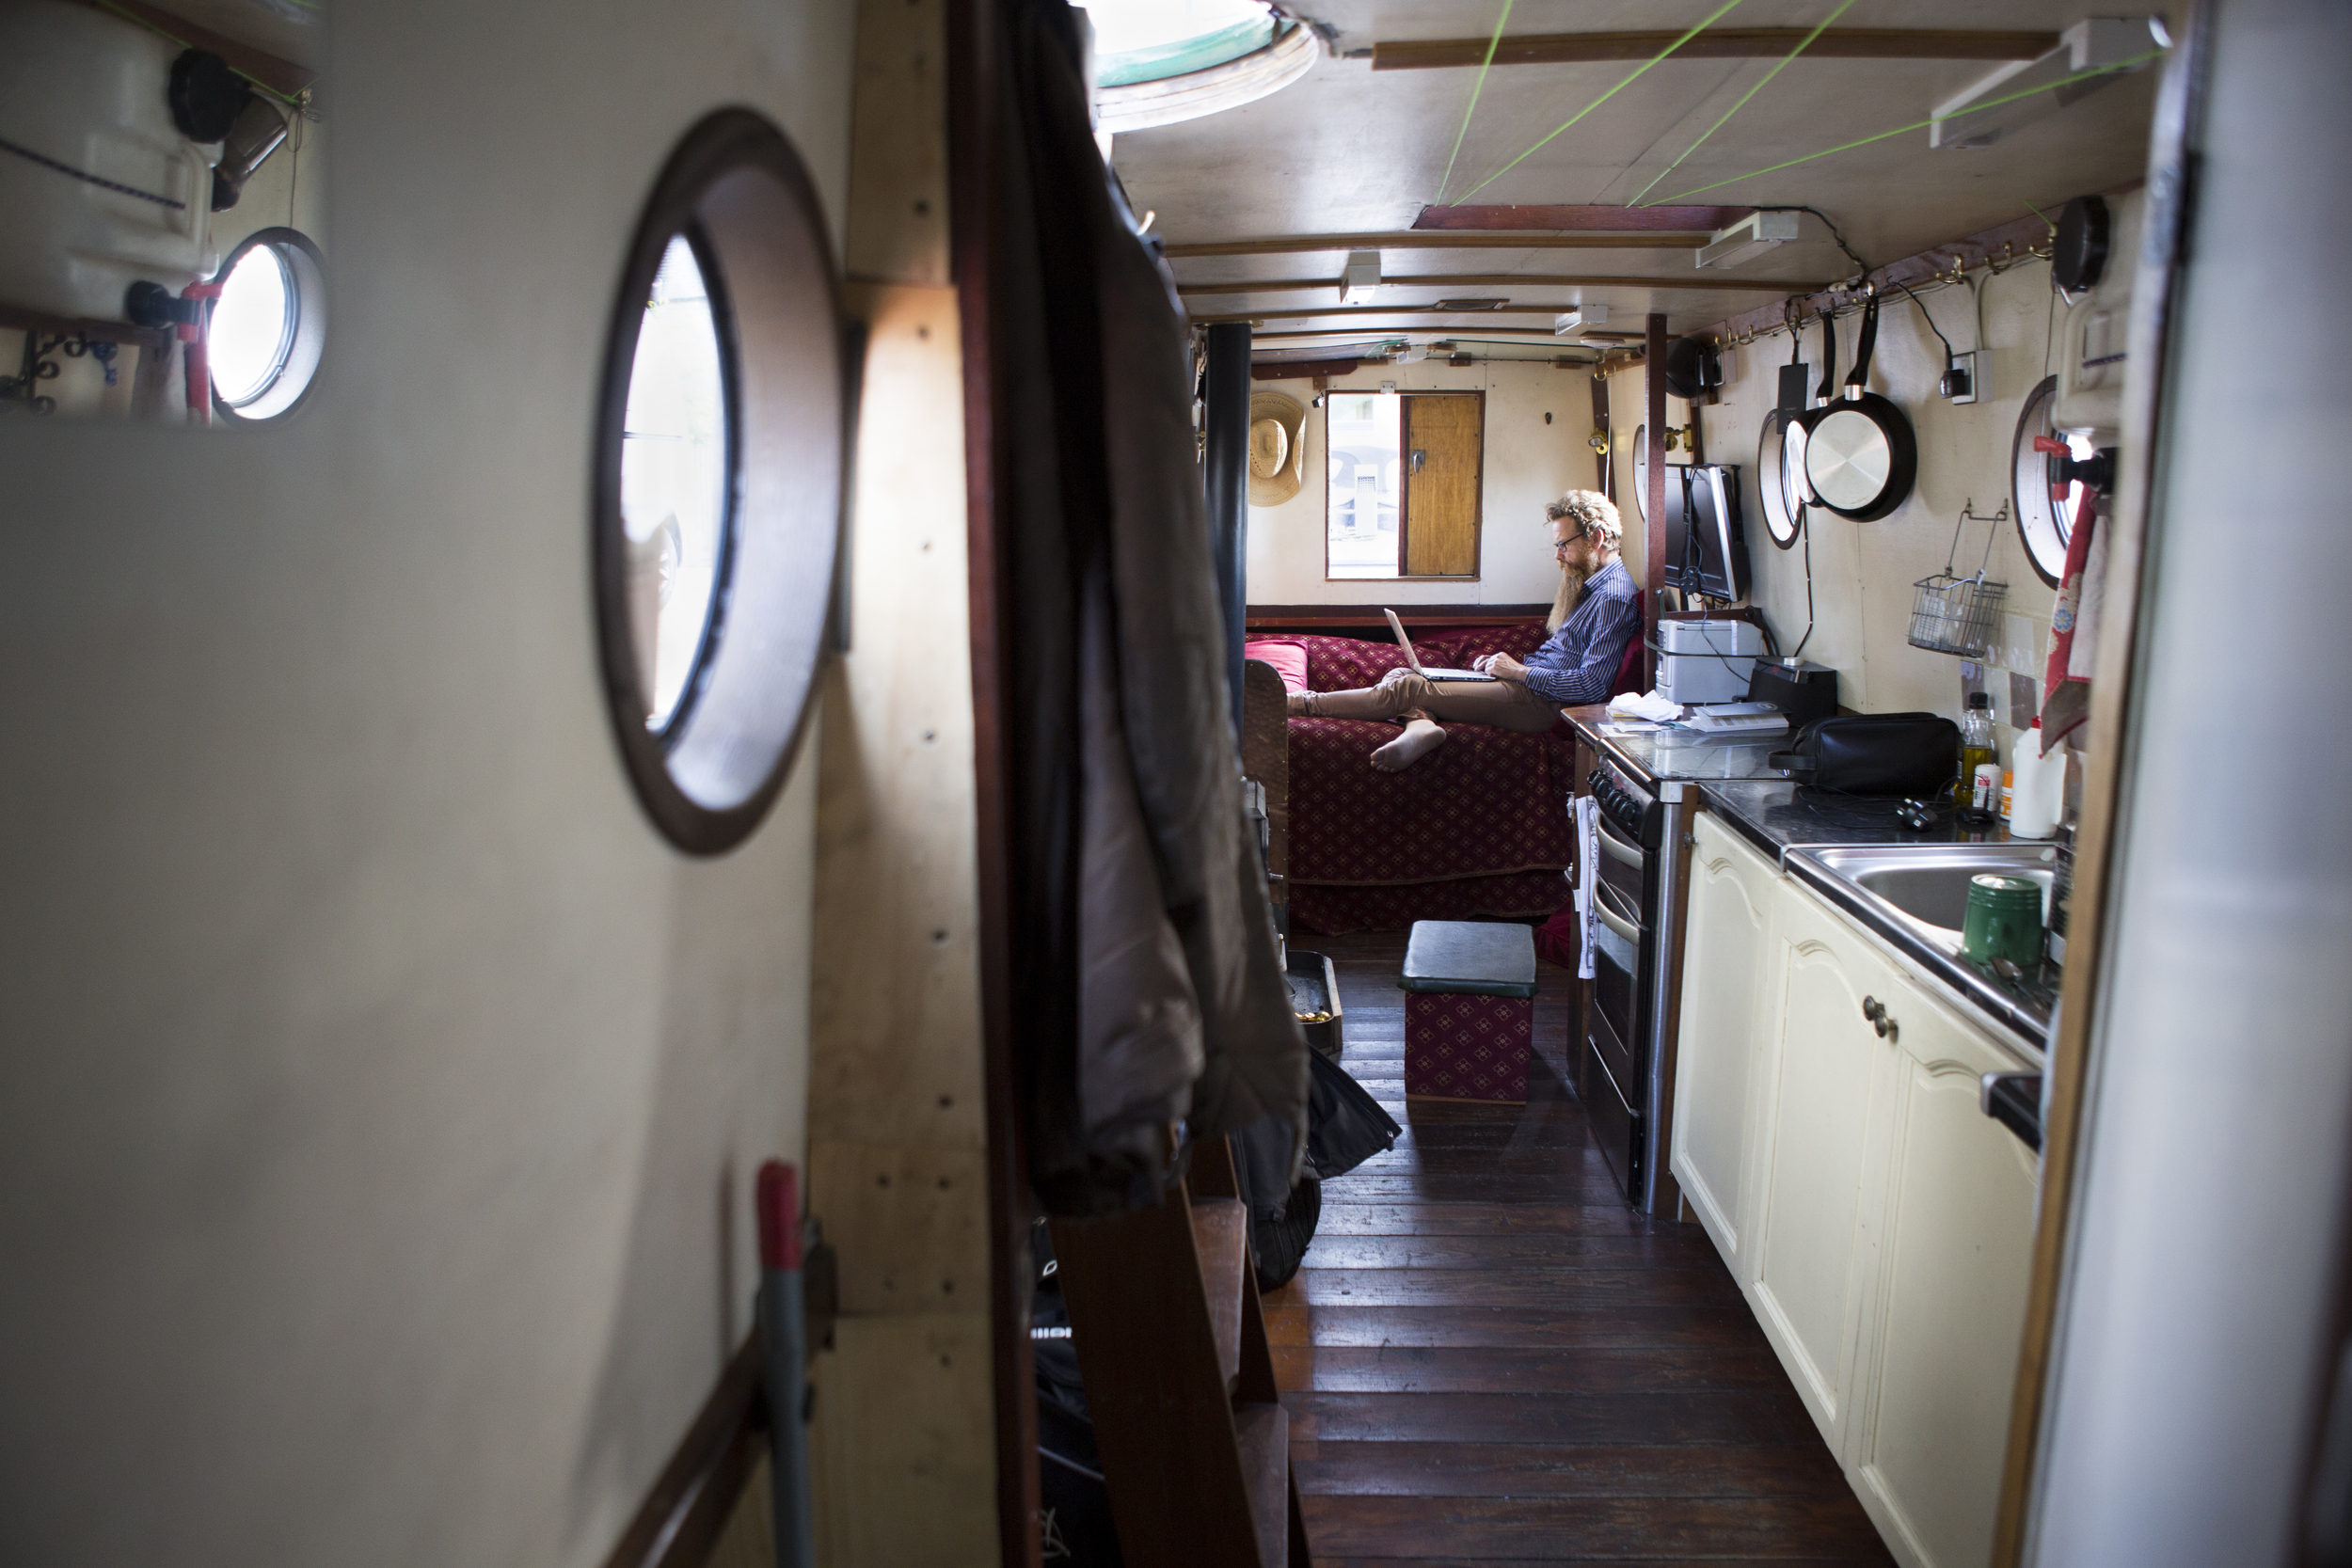  Nic Boyes works on his laptop in his houseboat along the Union Canal in Edinburgh, Scotland on August 1, 2015. Boyes has lived in a houseboat for several years and said he likes the freedom it affords him in moving around. 